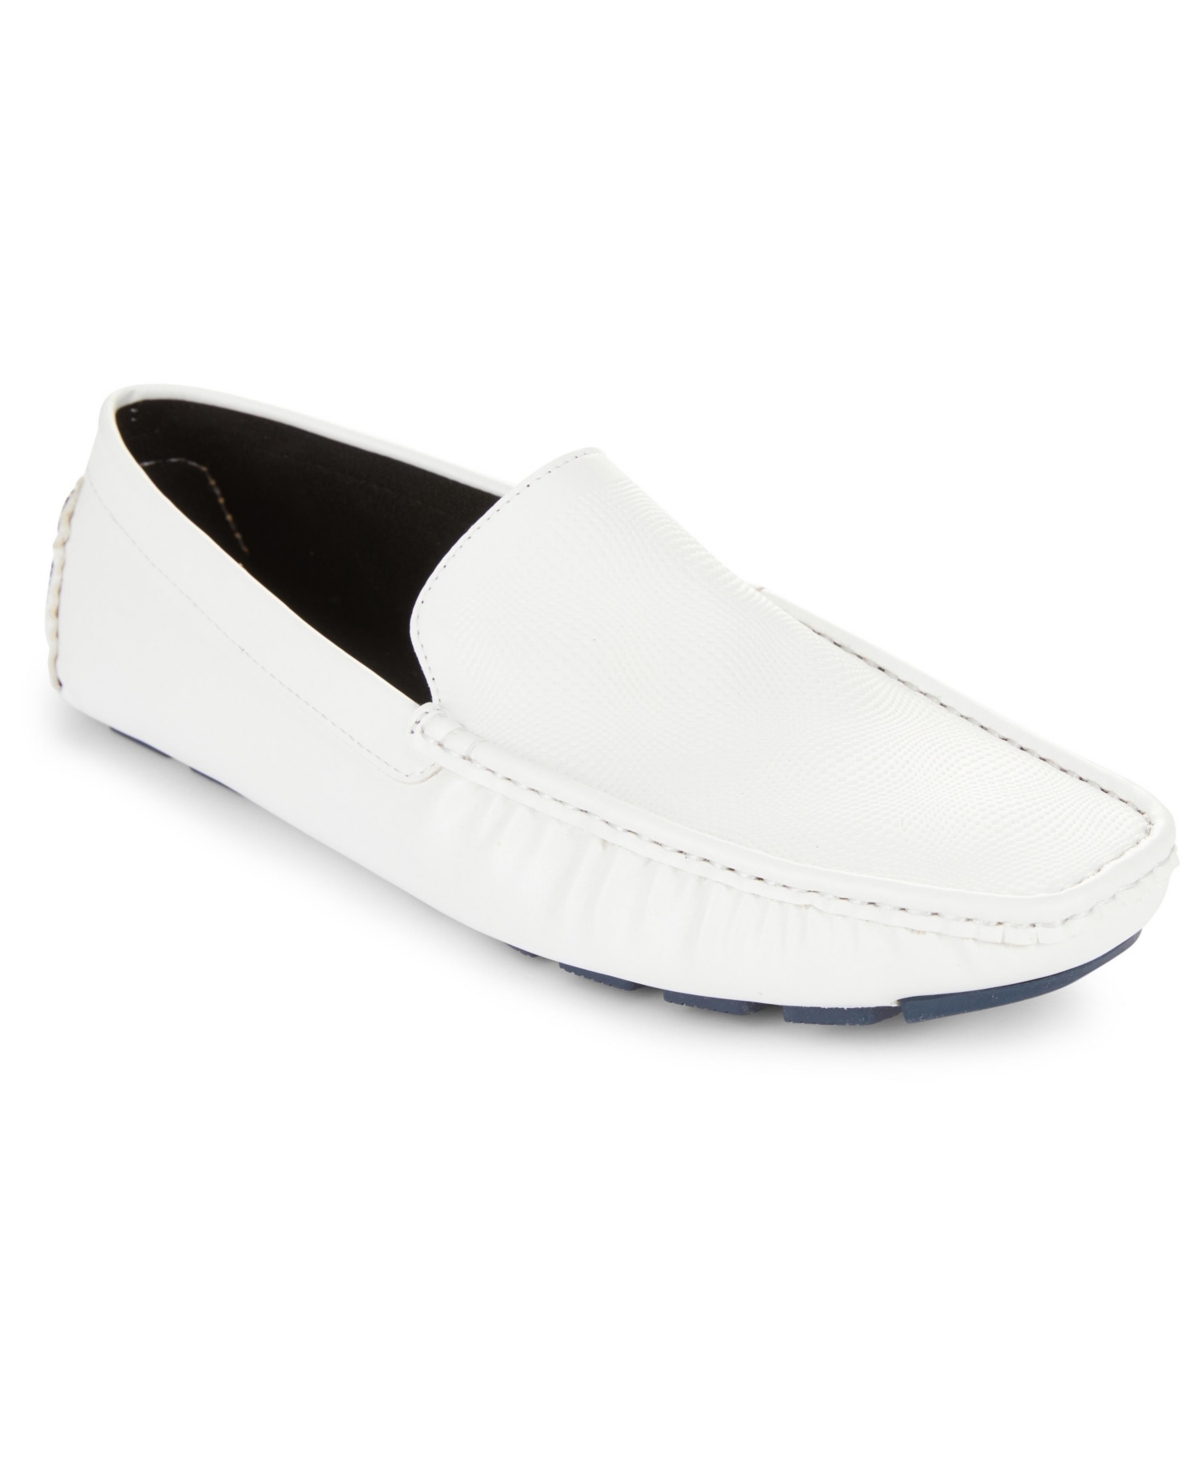 Men's Sound Textured Slip-On Driving Loafers - White